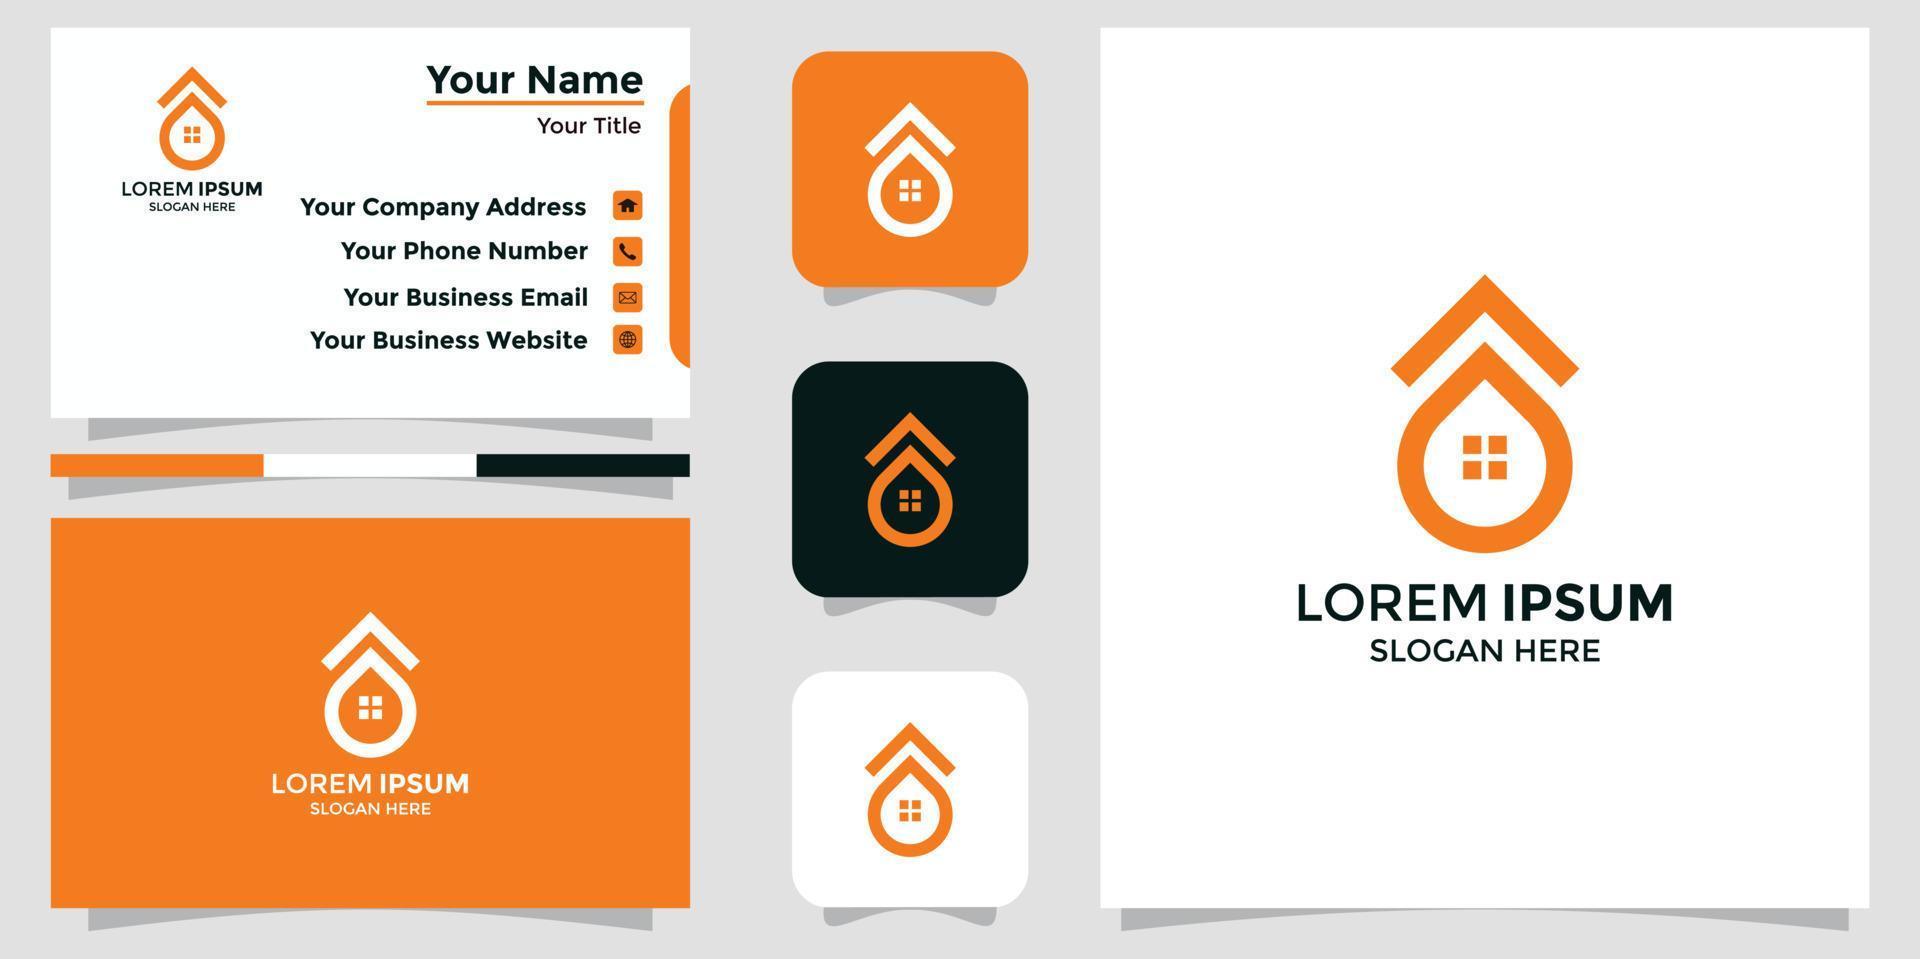 Minimalist real estate logo and branding card vector